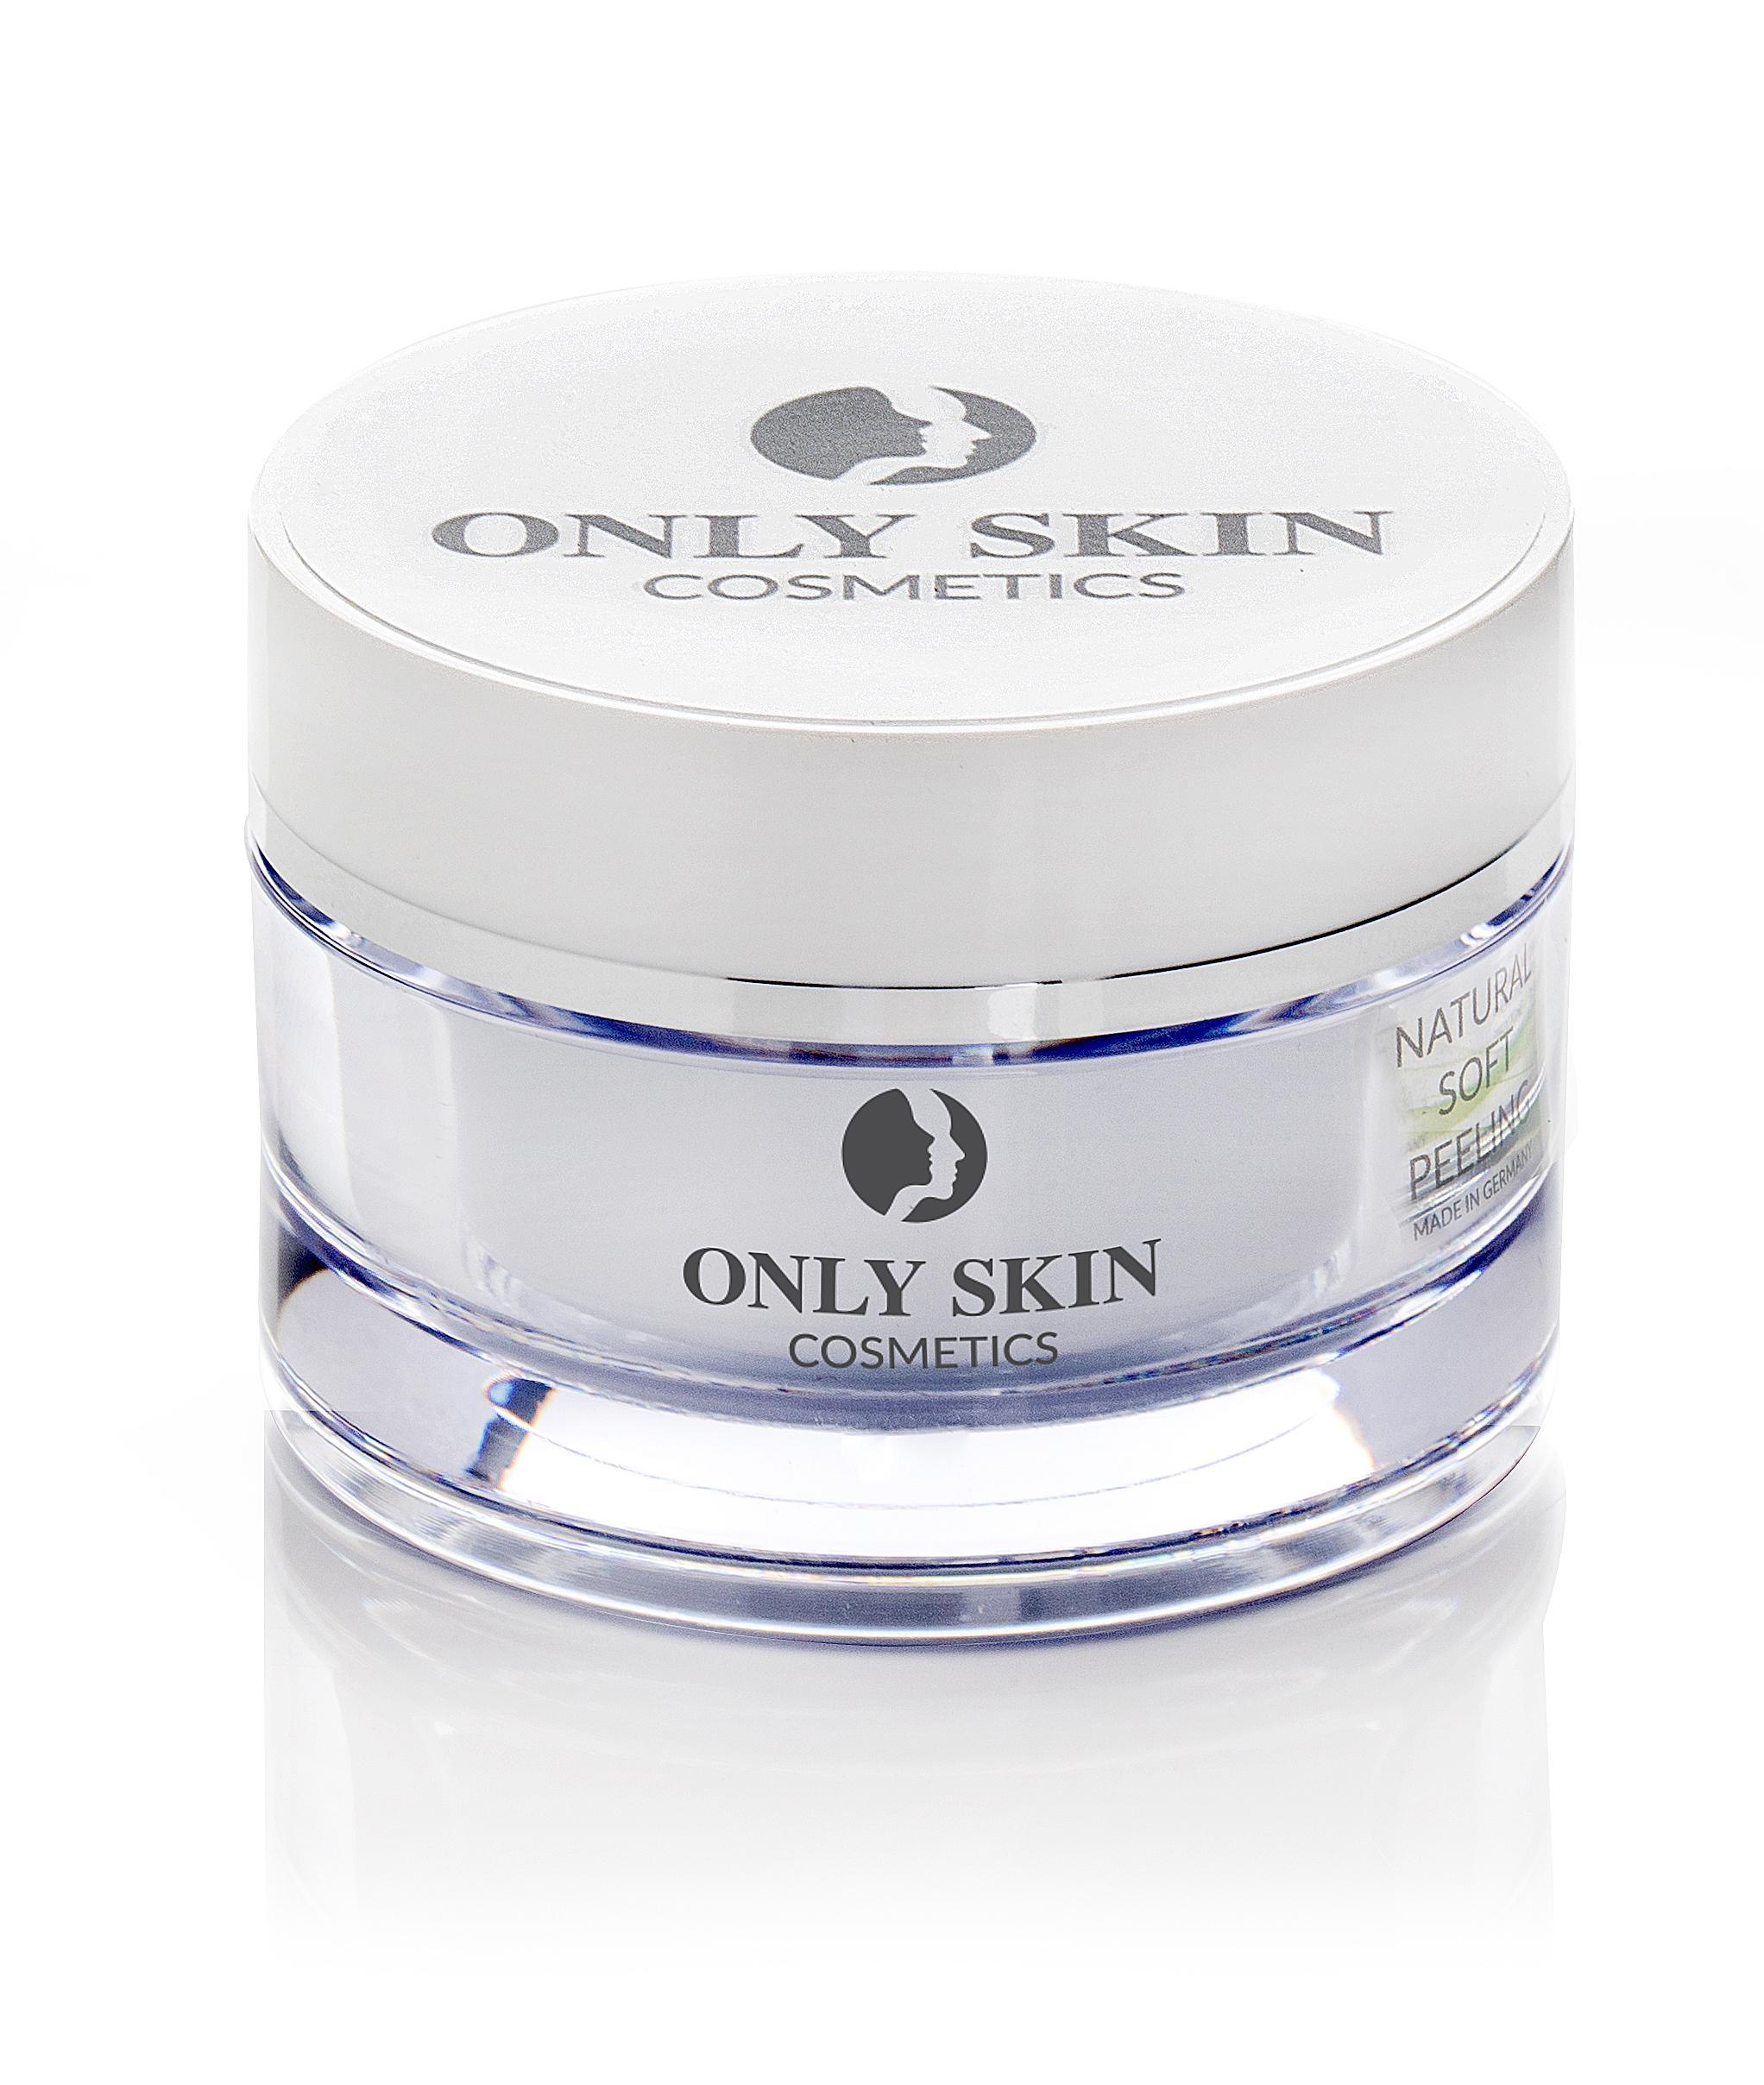 ONLY SKIN COSMETICS - NATURAL SOFT PEELING